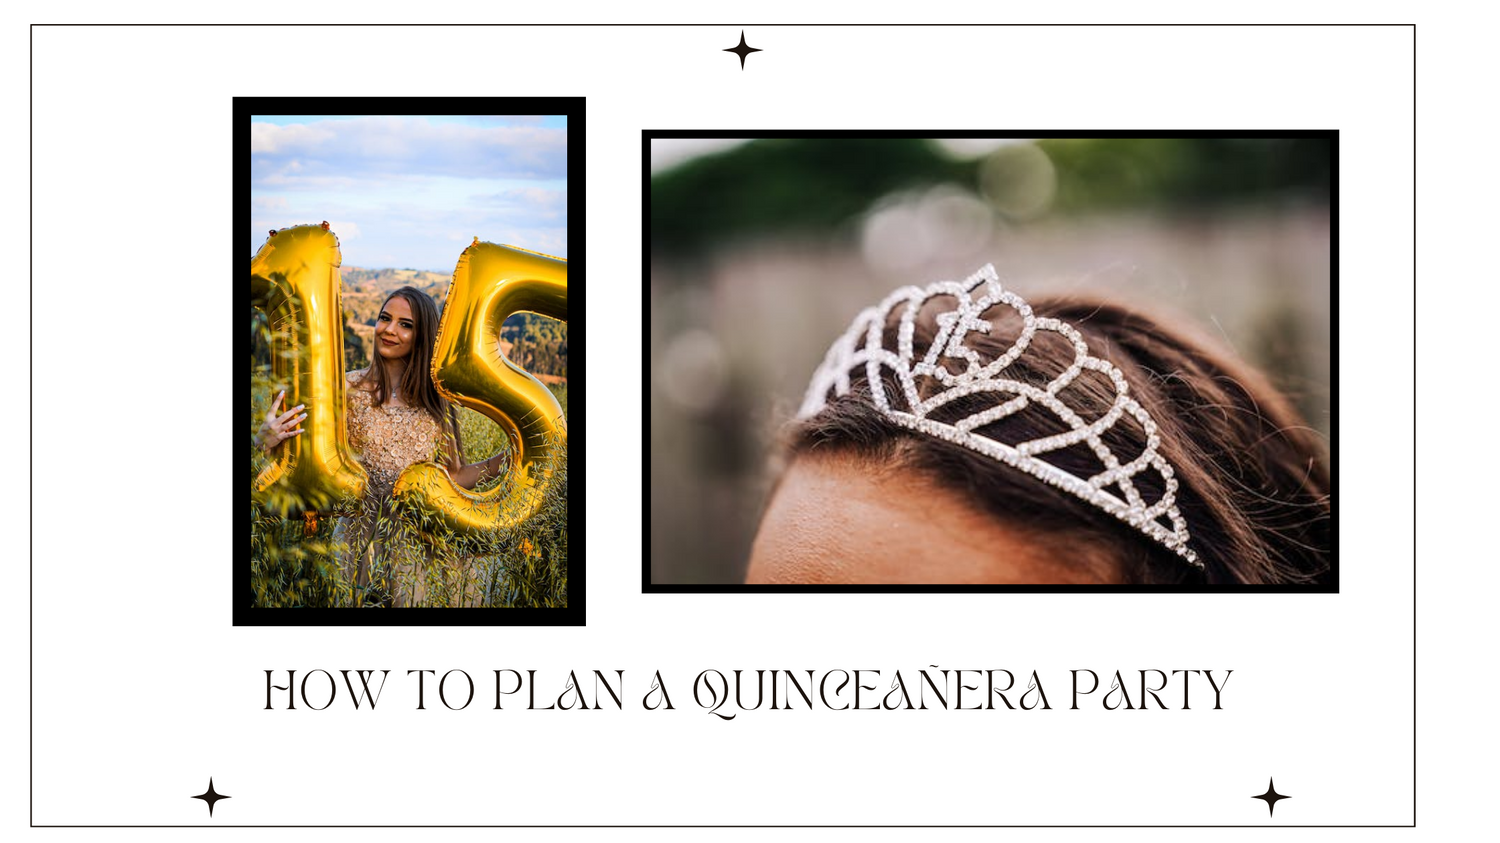 How to plan a quinceanera party